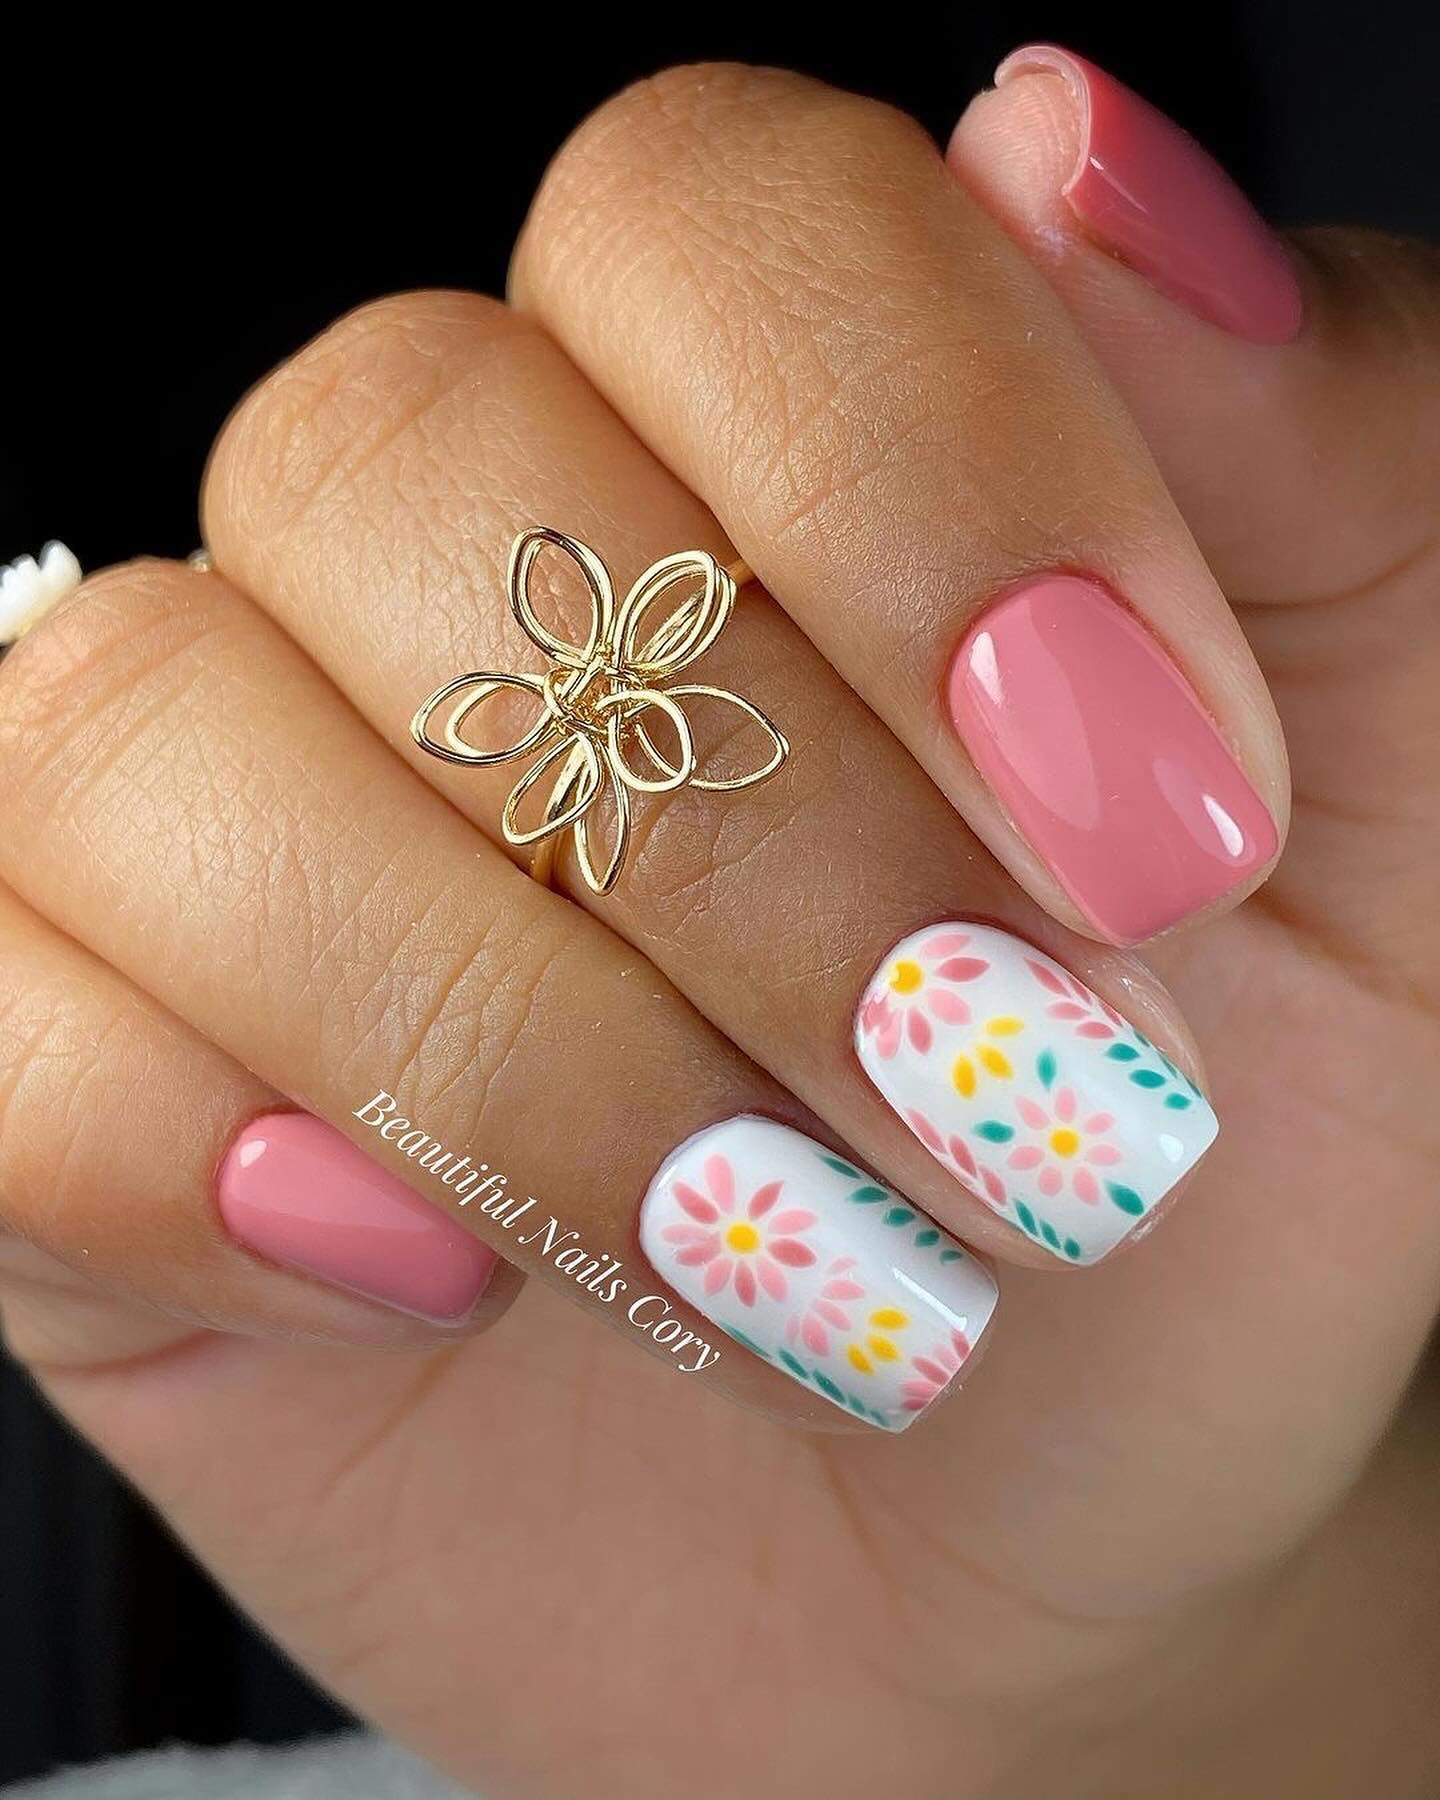 100 Of The Best Spring Inspired Nail Designs images 93